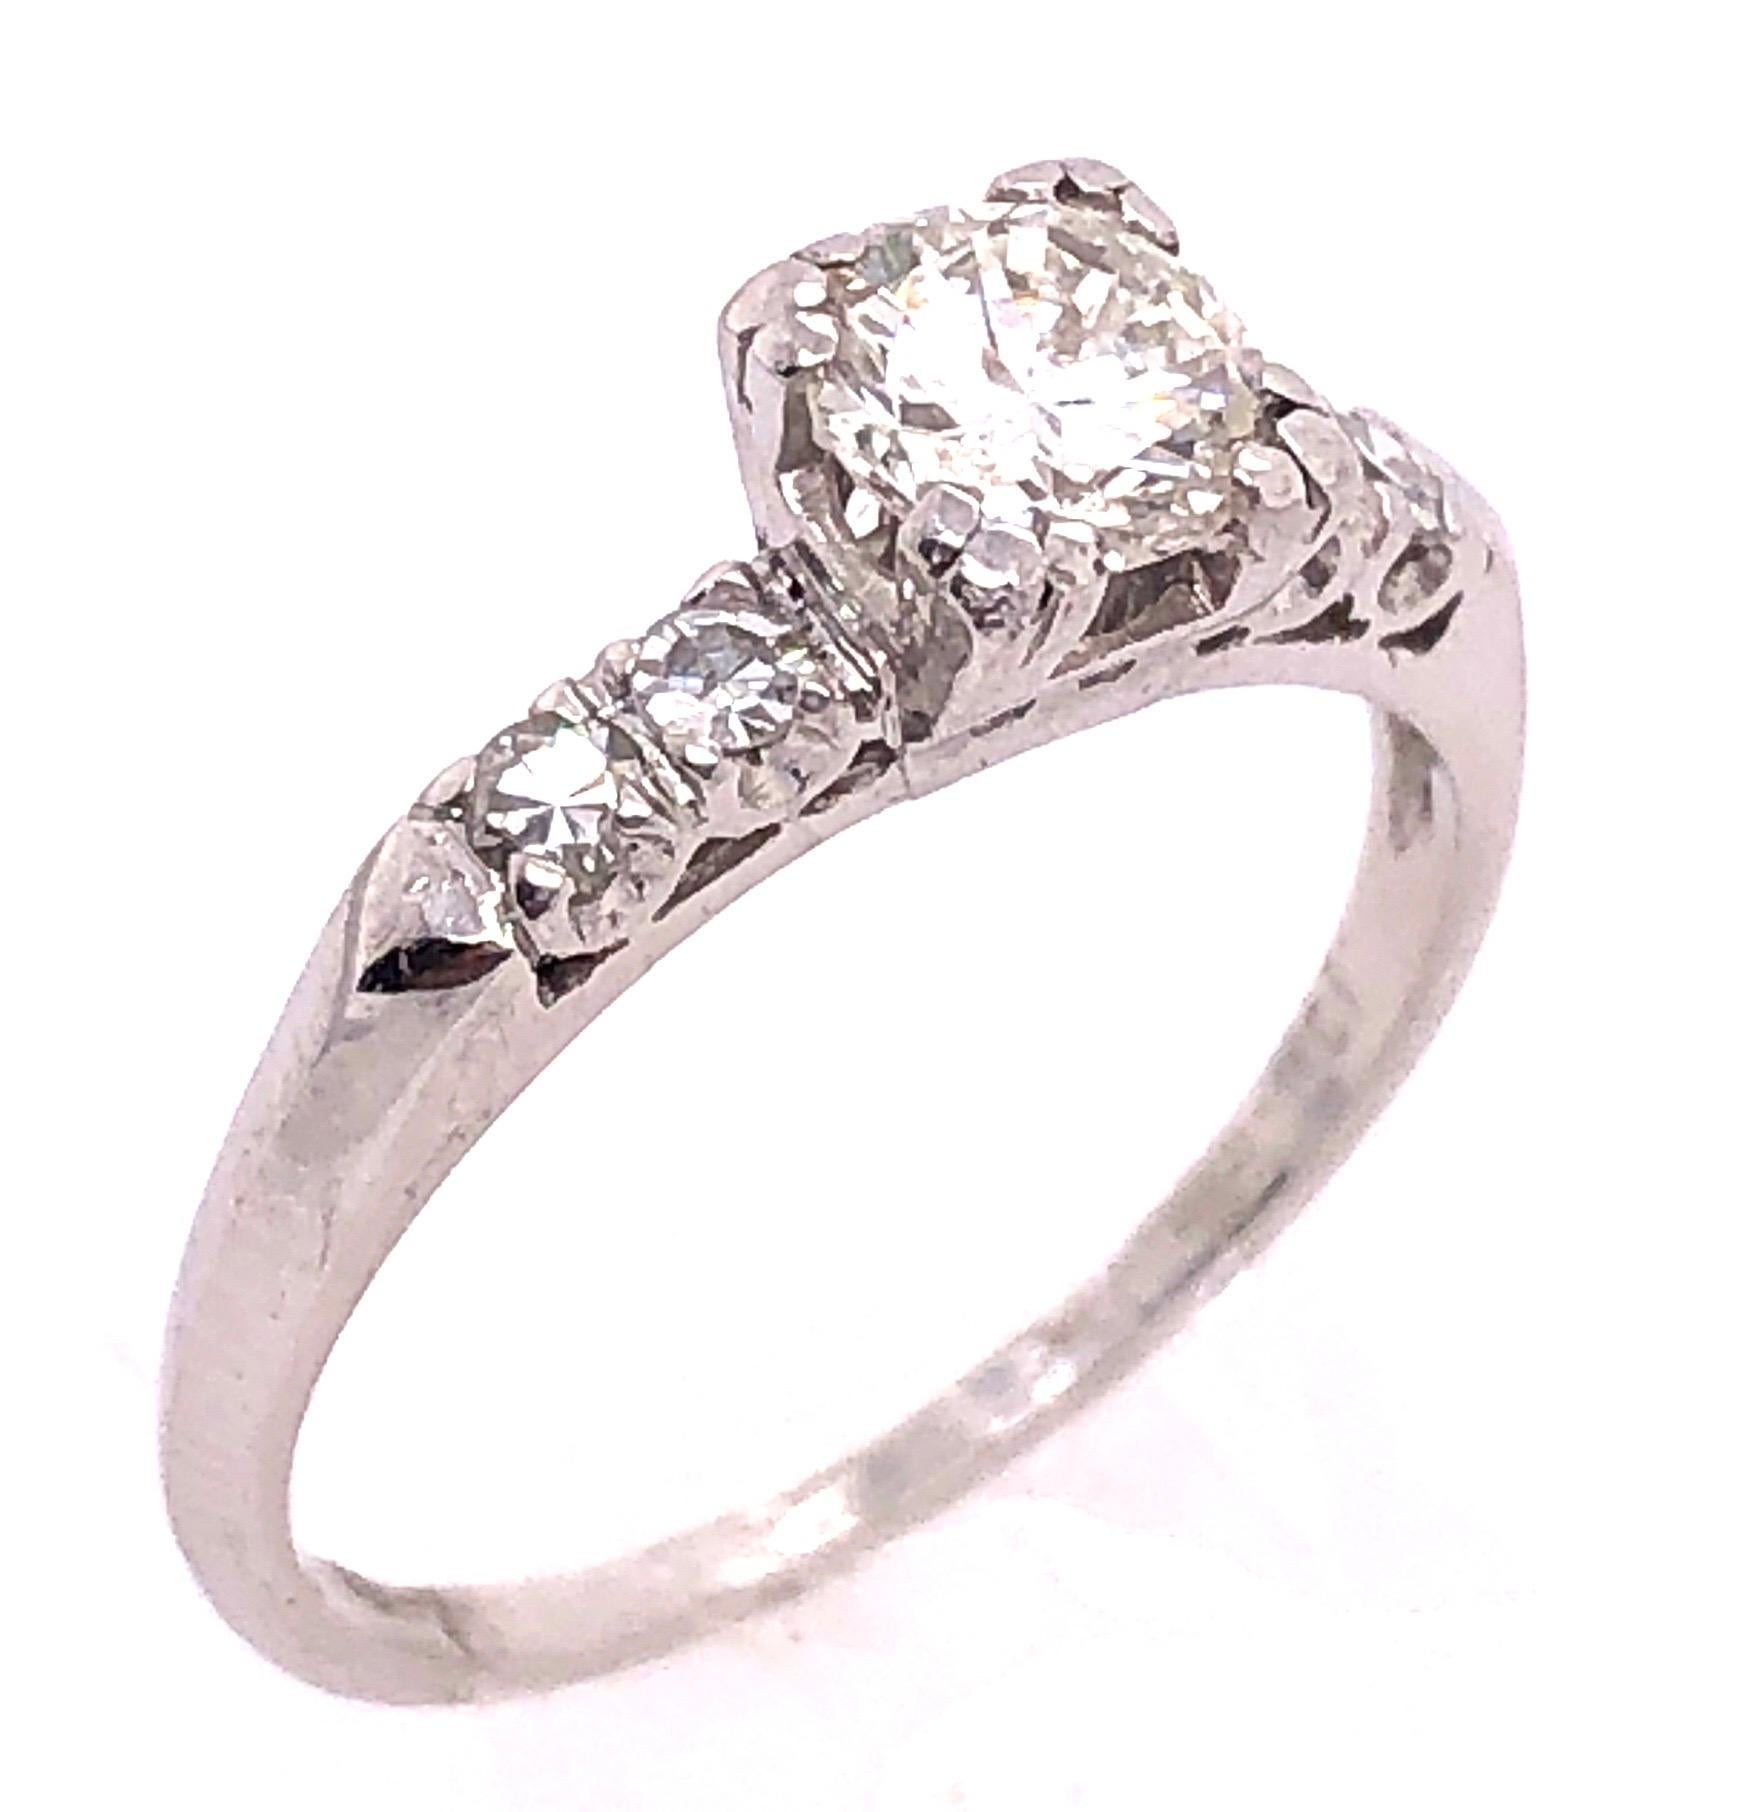 Round Cut Platinum Diamond Engagement Ring 0.85 Total Diamond Weight For Sale